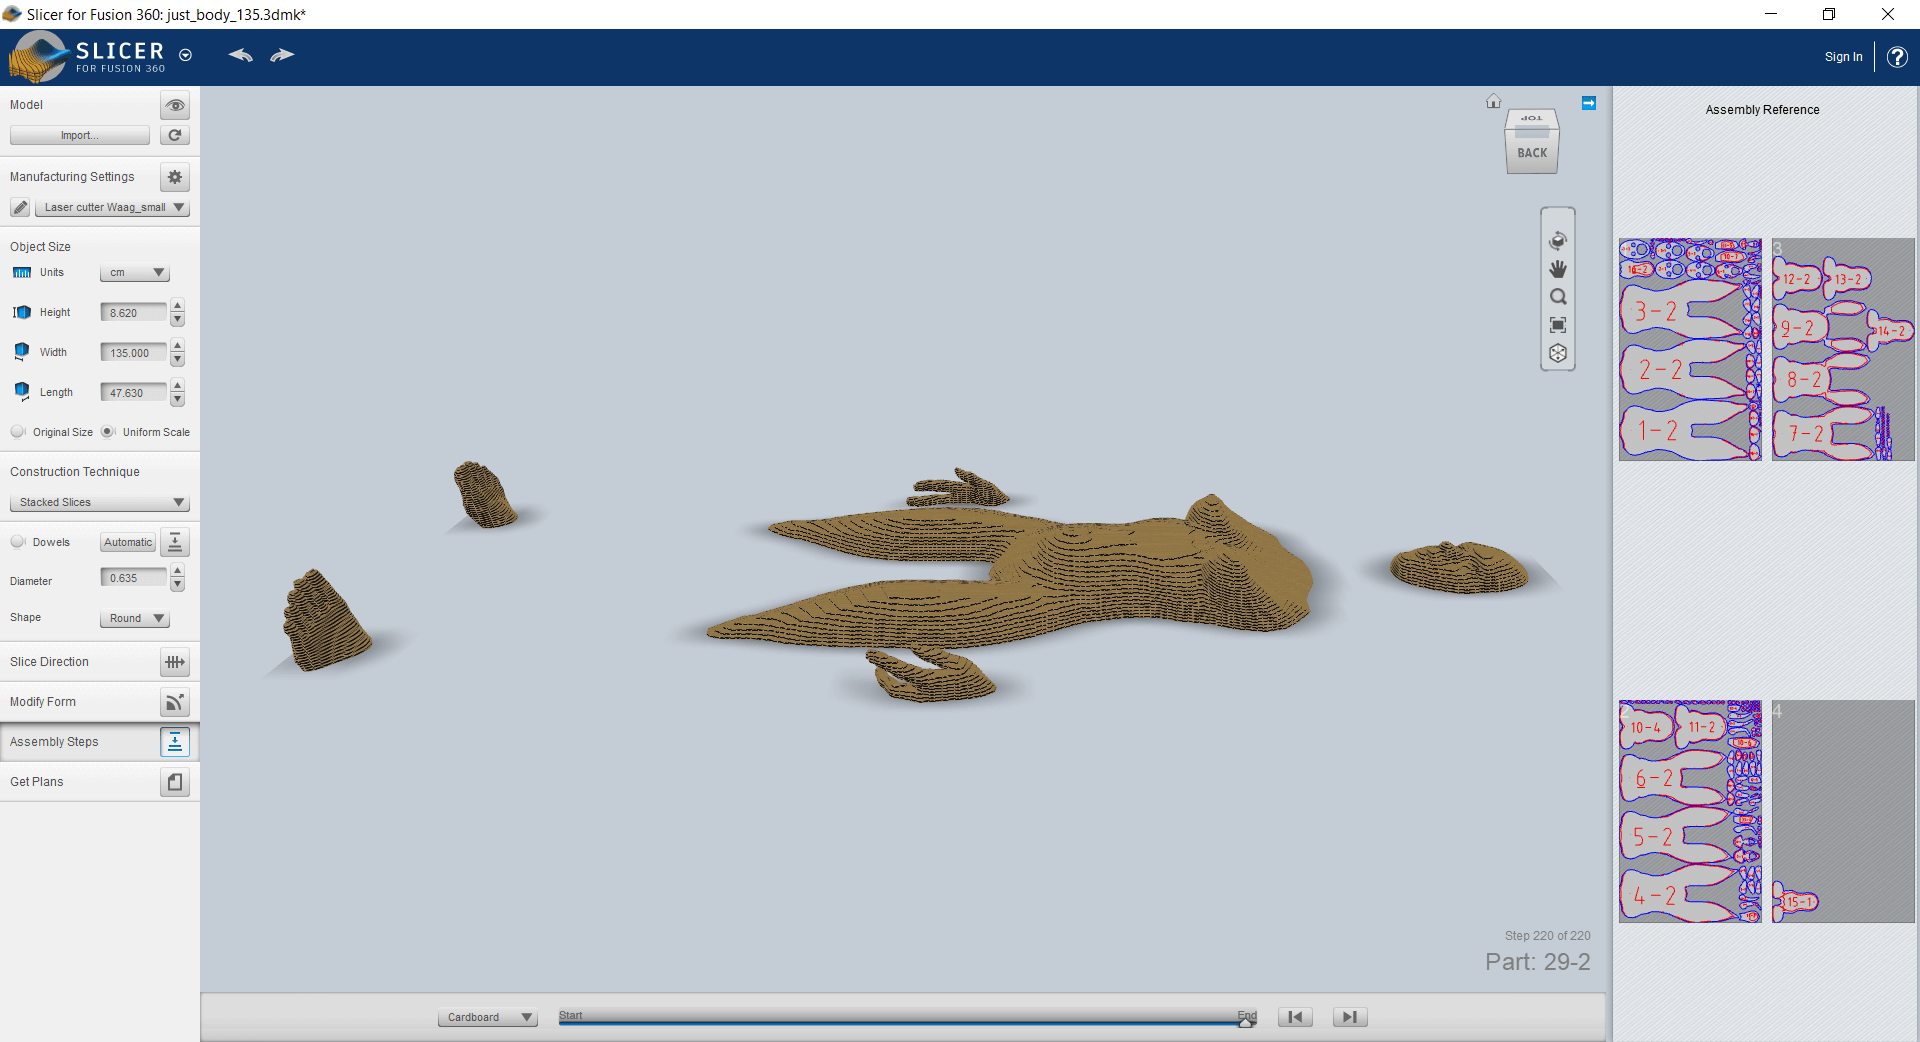 The view of the final model in Slicer